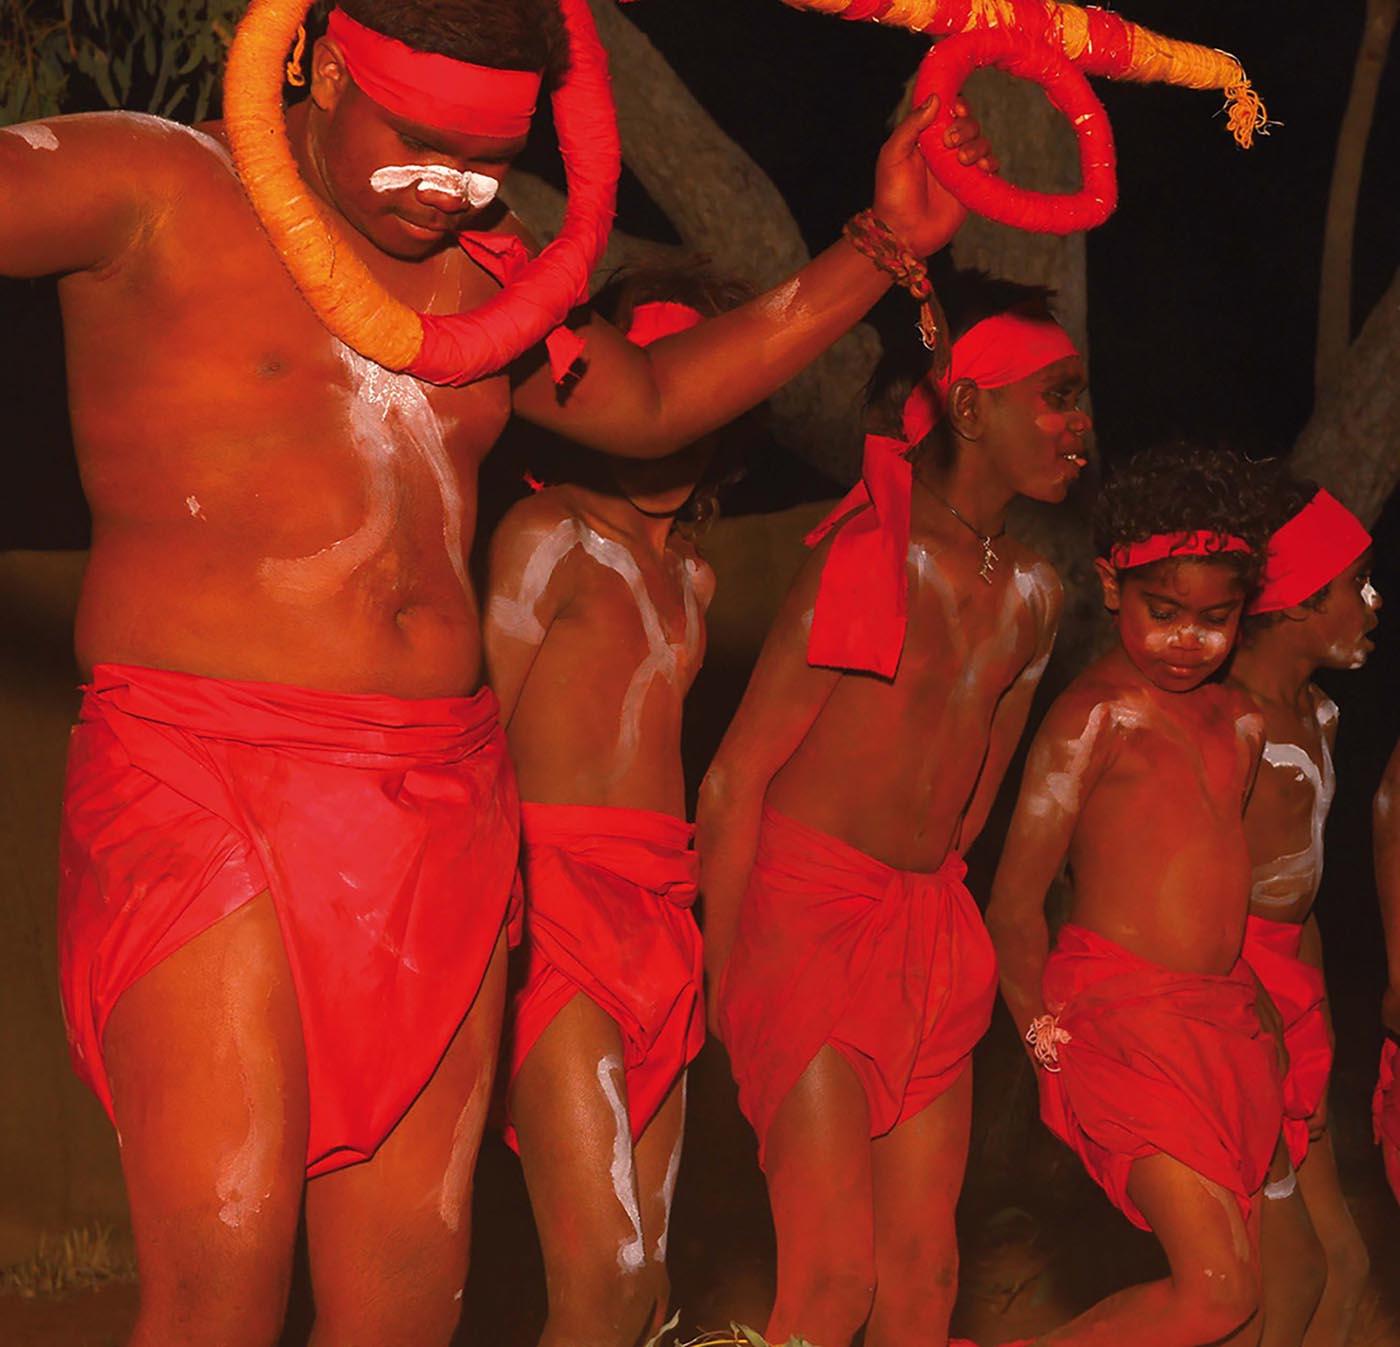 Colour photo of a group of young male dancers performing in red attire.